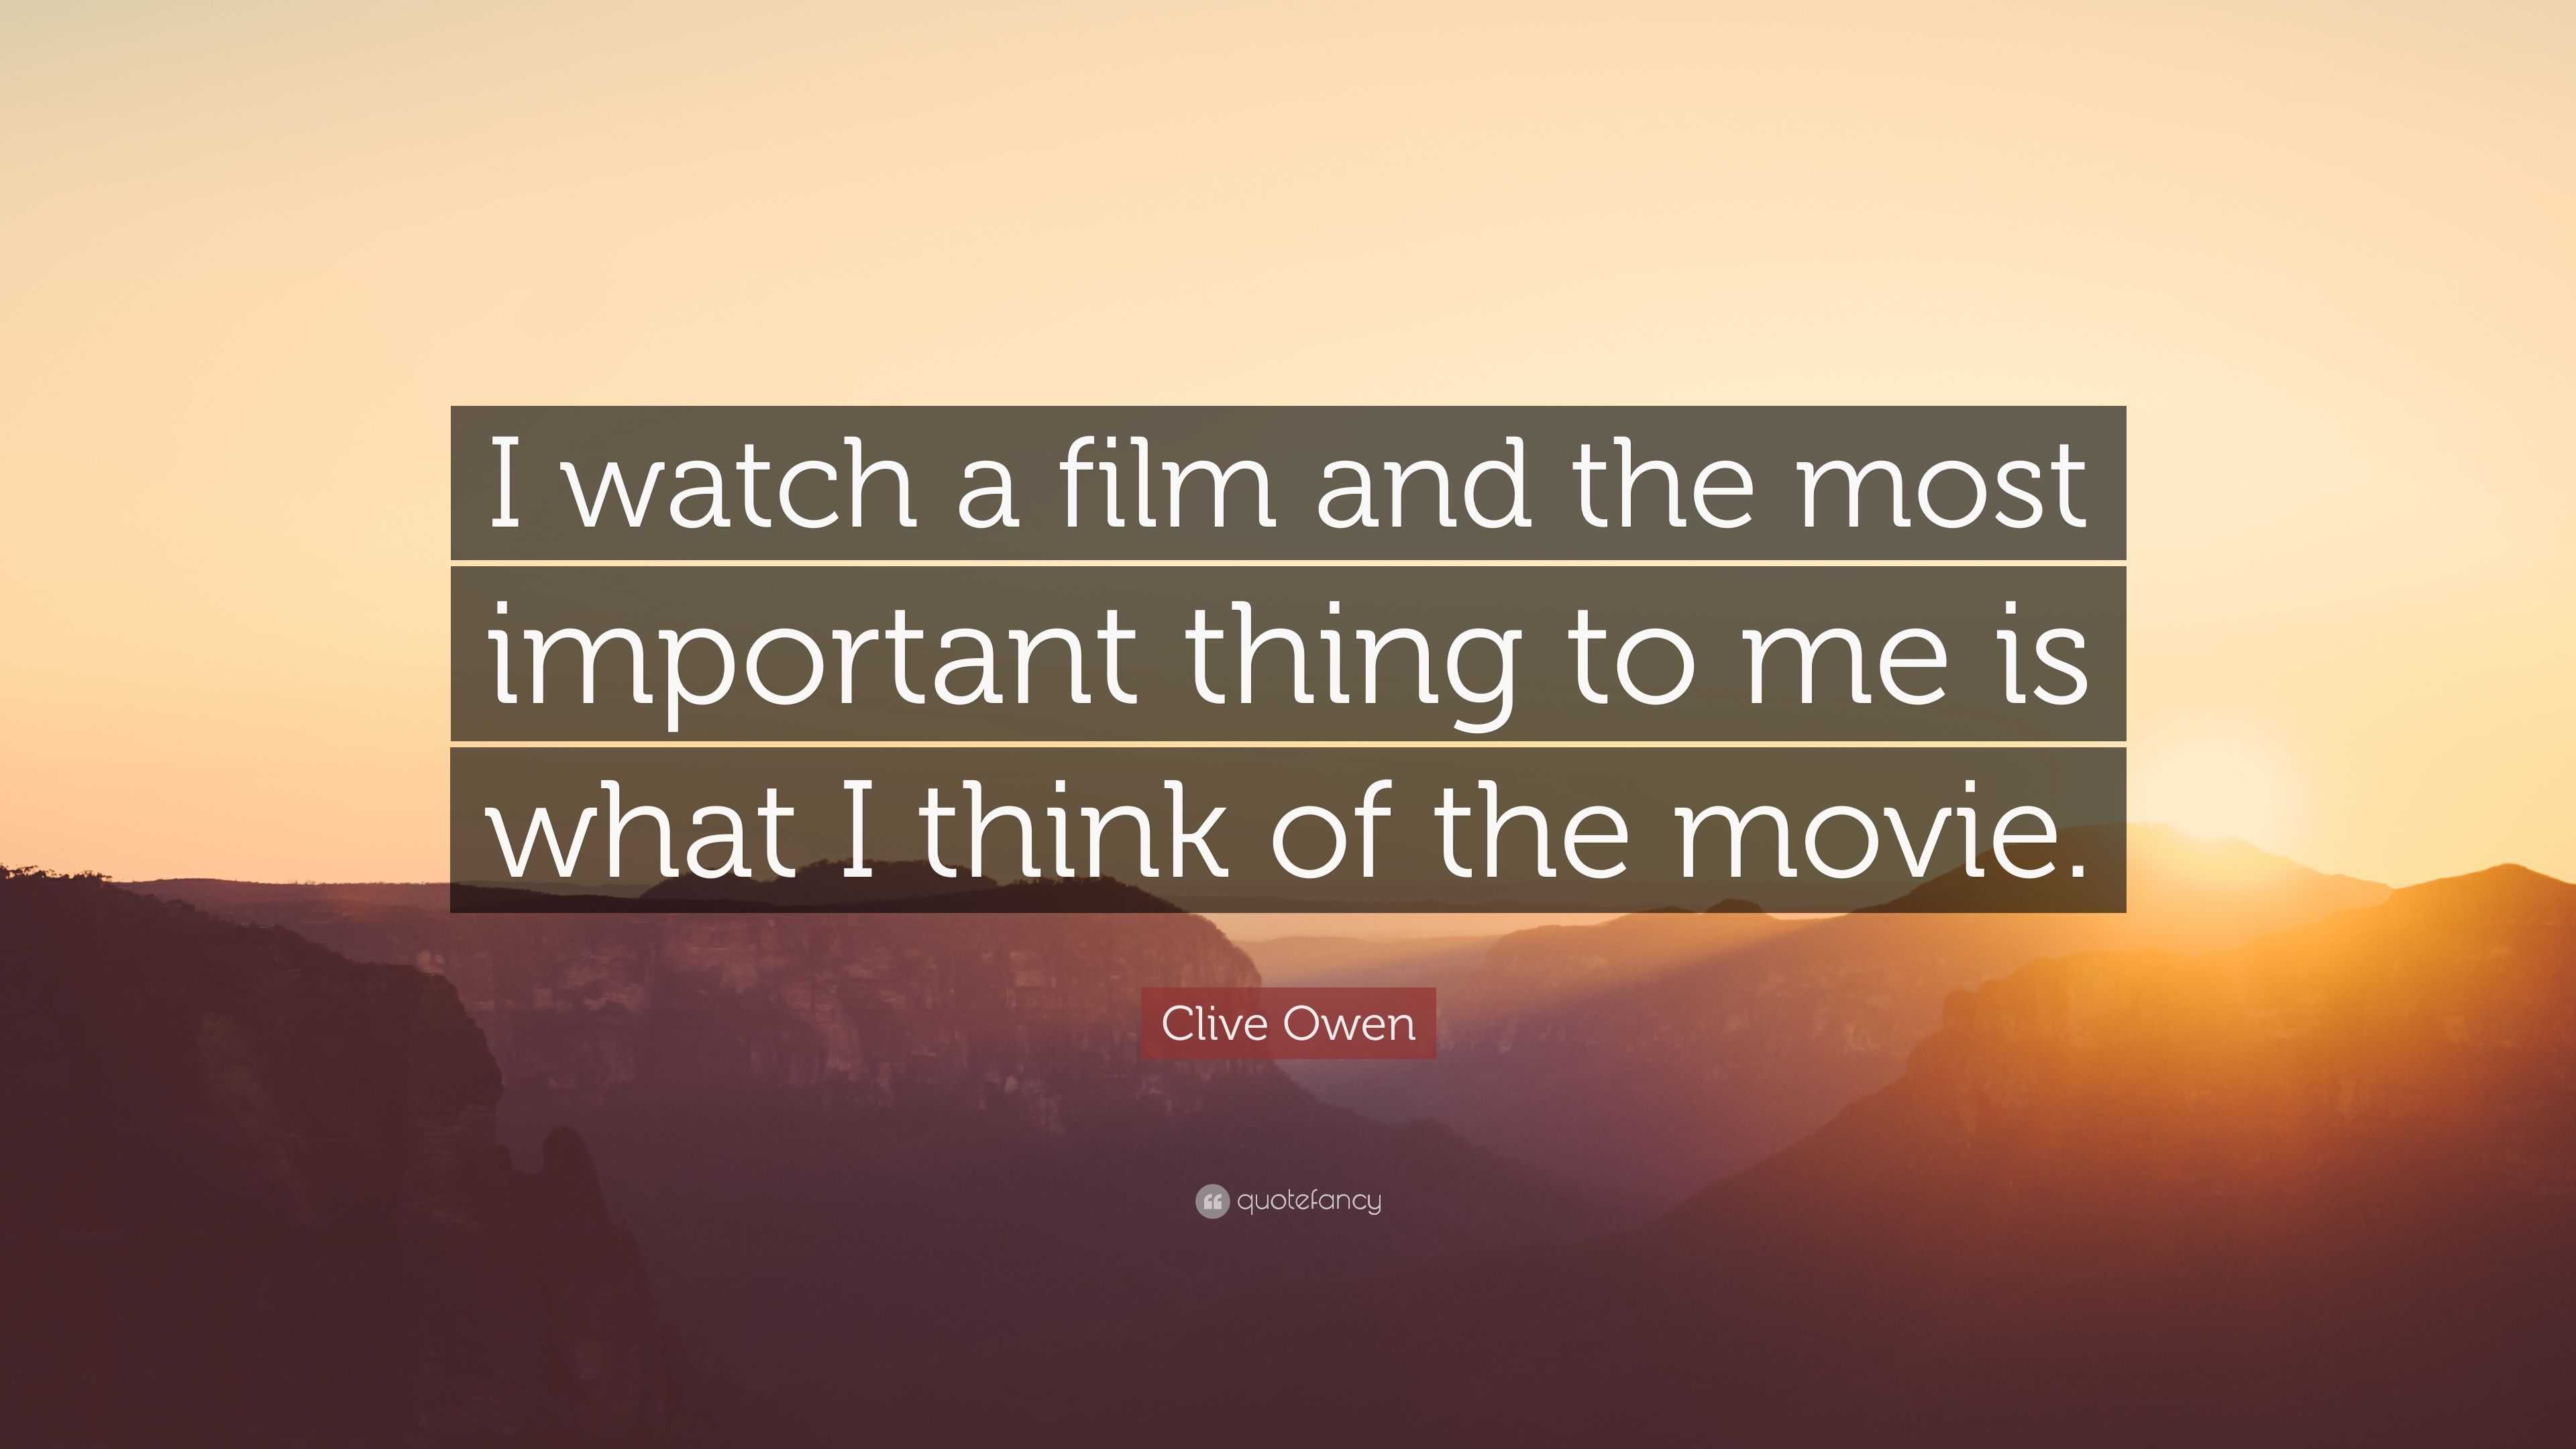 5582207 Clive Owen Quote I watch a film and the most important thing to me